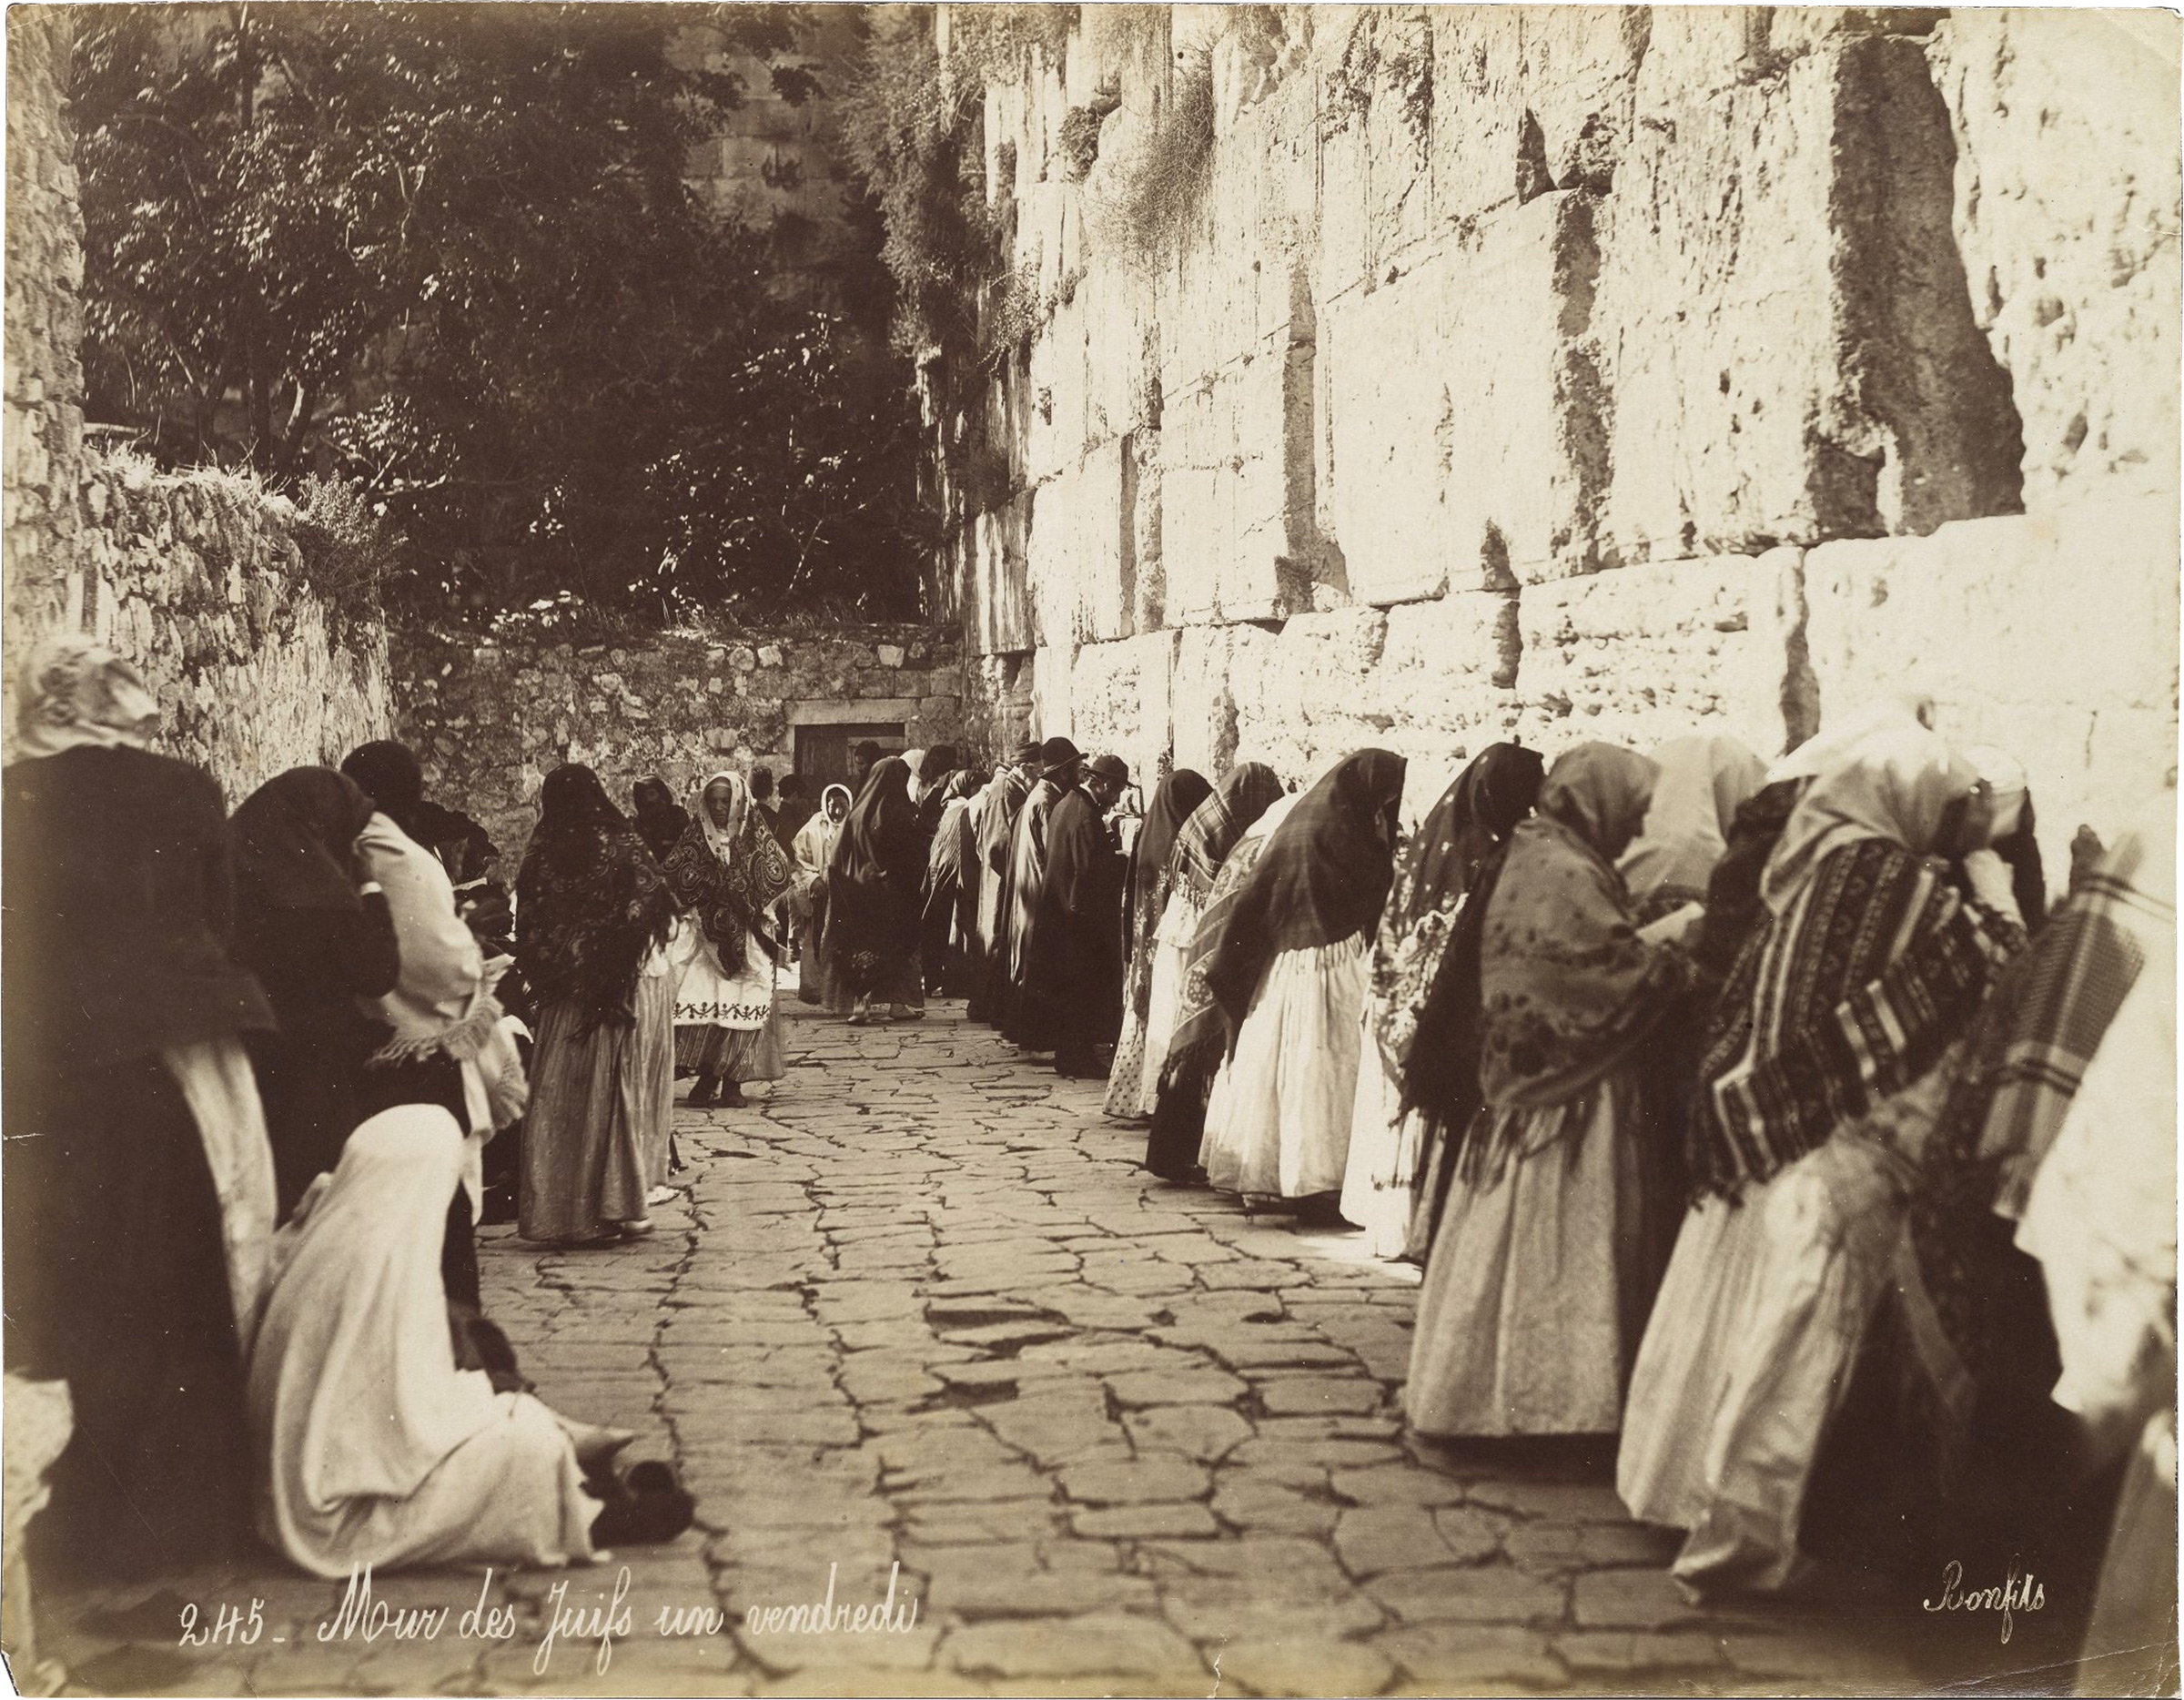 Photograph by Felix Bonfils showing men and women at the Wall